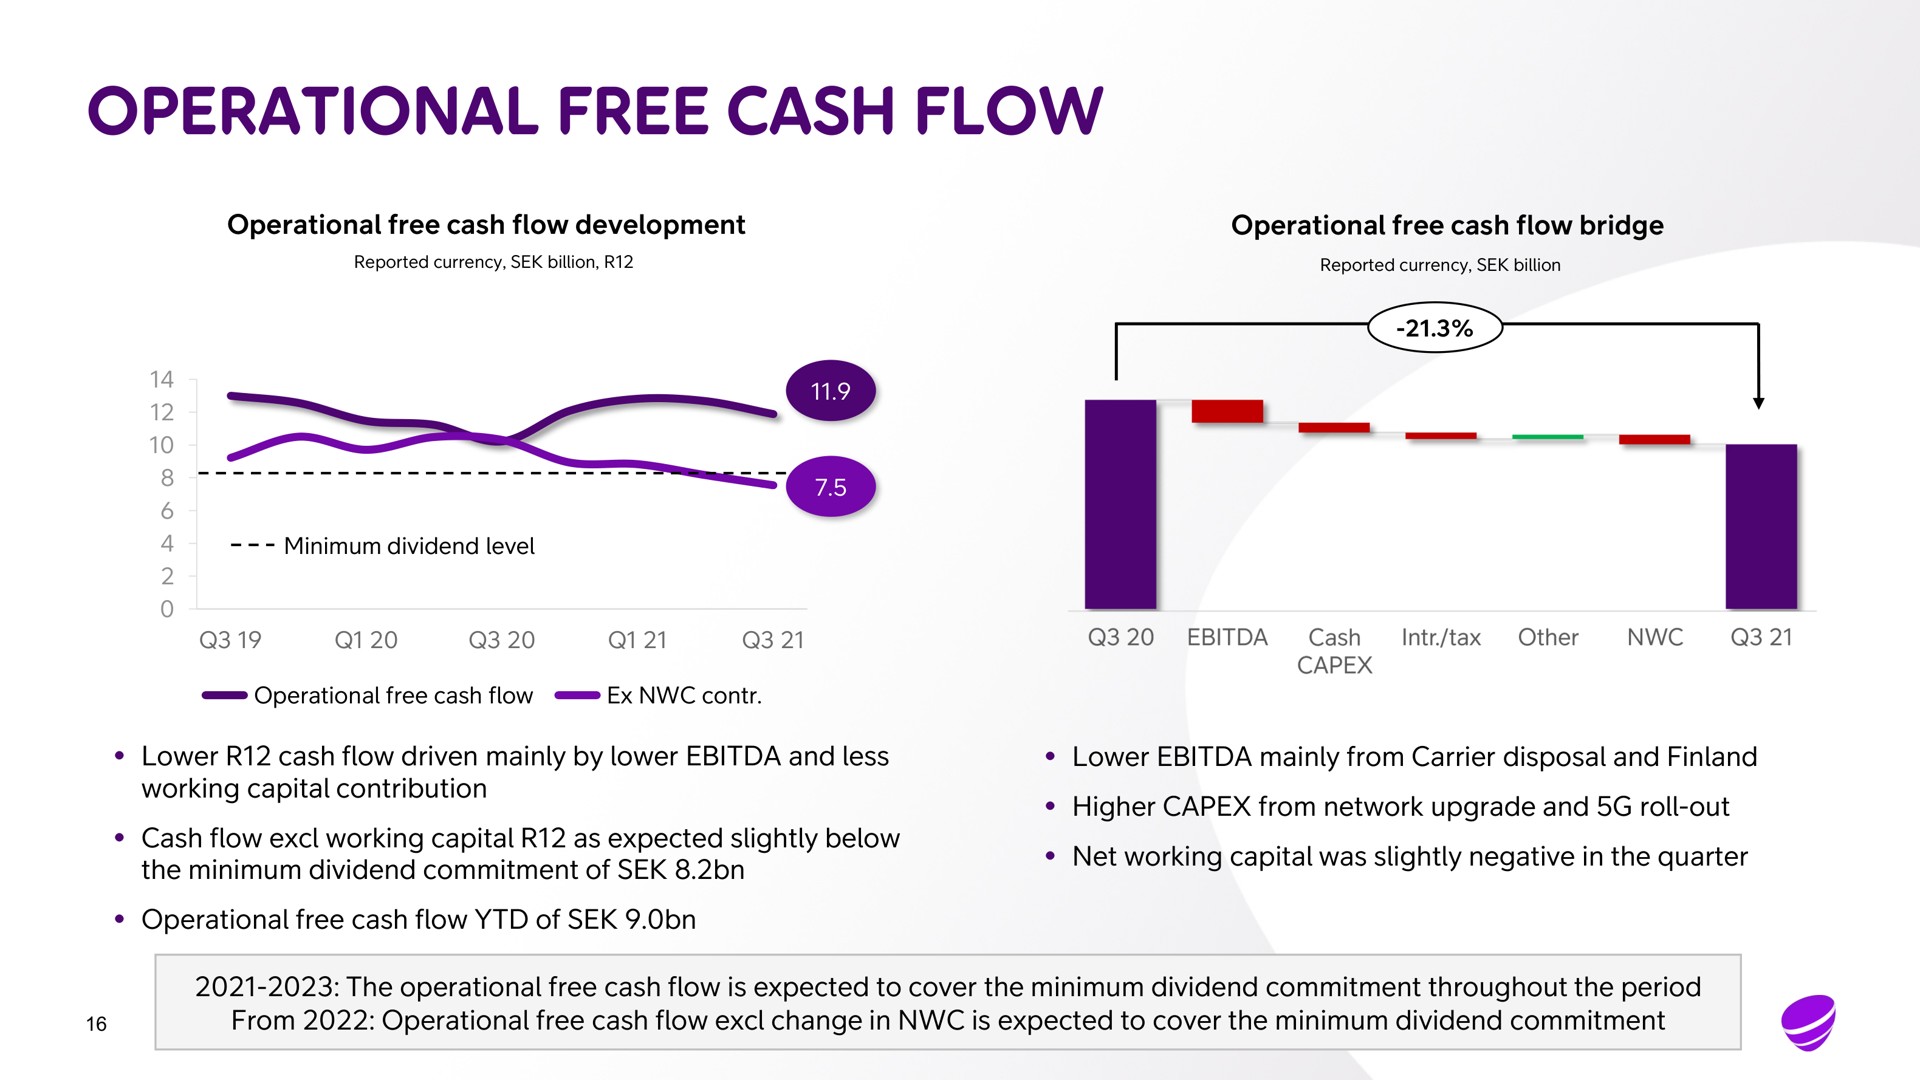 operational free cash flow operational free cash flow development operational free cash flow bridge lower cash flow driven mainly by lower and less lower mainly from carrier disposal and finland working capital contribution cash flow working capital as expected slightly below the minimum dividend commitment of operational free cash flow of higher from network upgrade and roll out net working capital was slightly negative in the quarter the operational free cash flow is expected to cover the minimum dividend commitment throughout the period from operational free cash flow change in is expected to cover the minimum dividend commitment | Telia Company